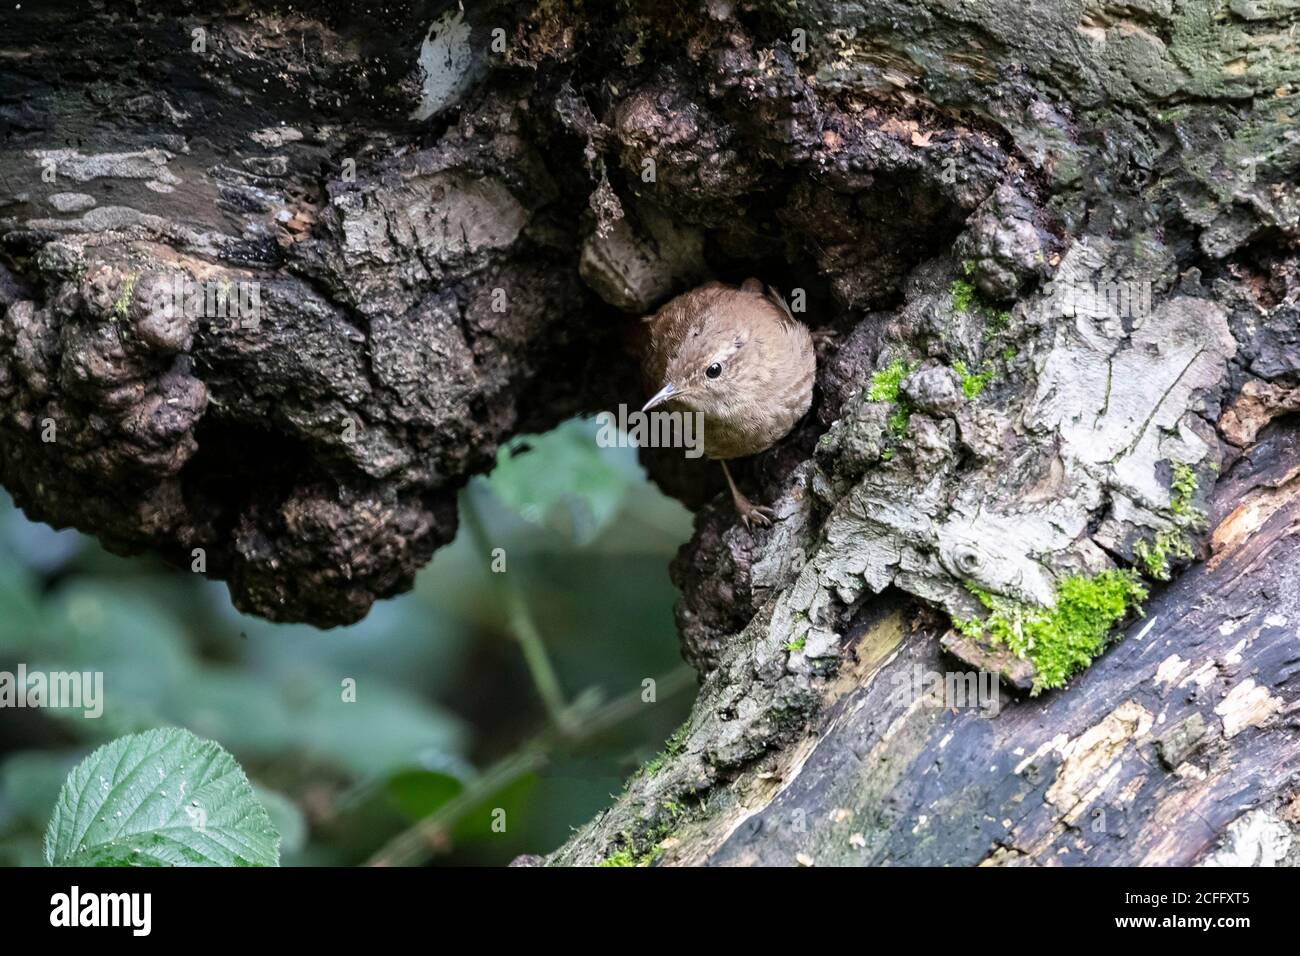 A British or Eurasian Wren Troglodytes troglodytes peering out from a recess in a tree in English countryside Stock Photo